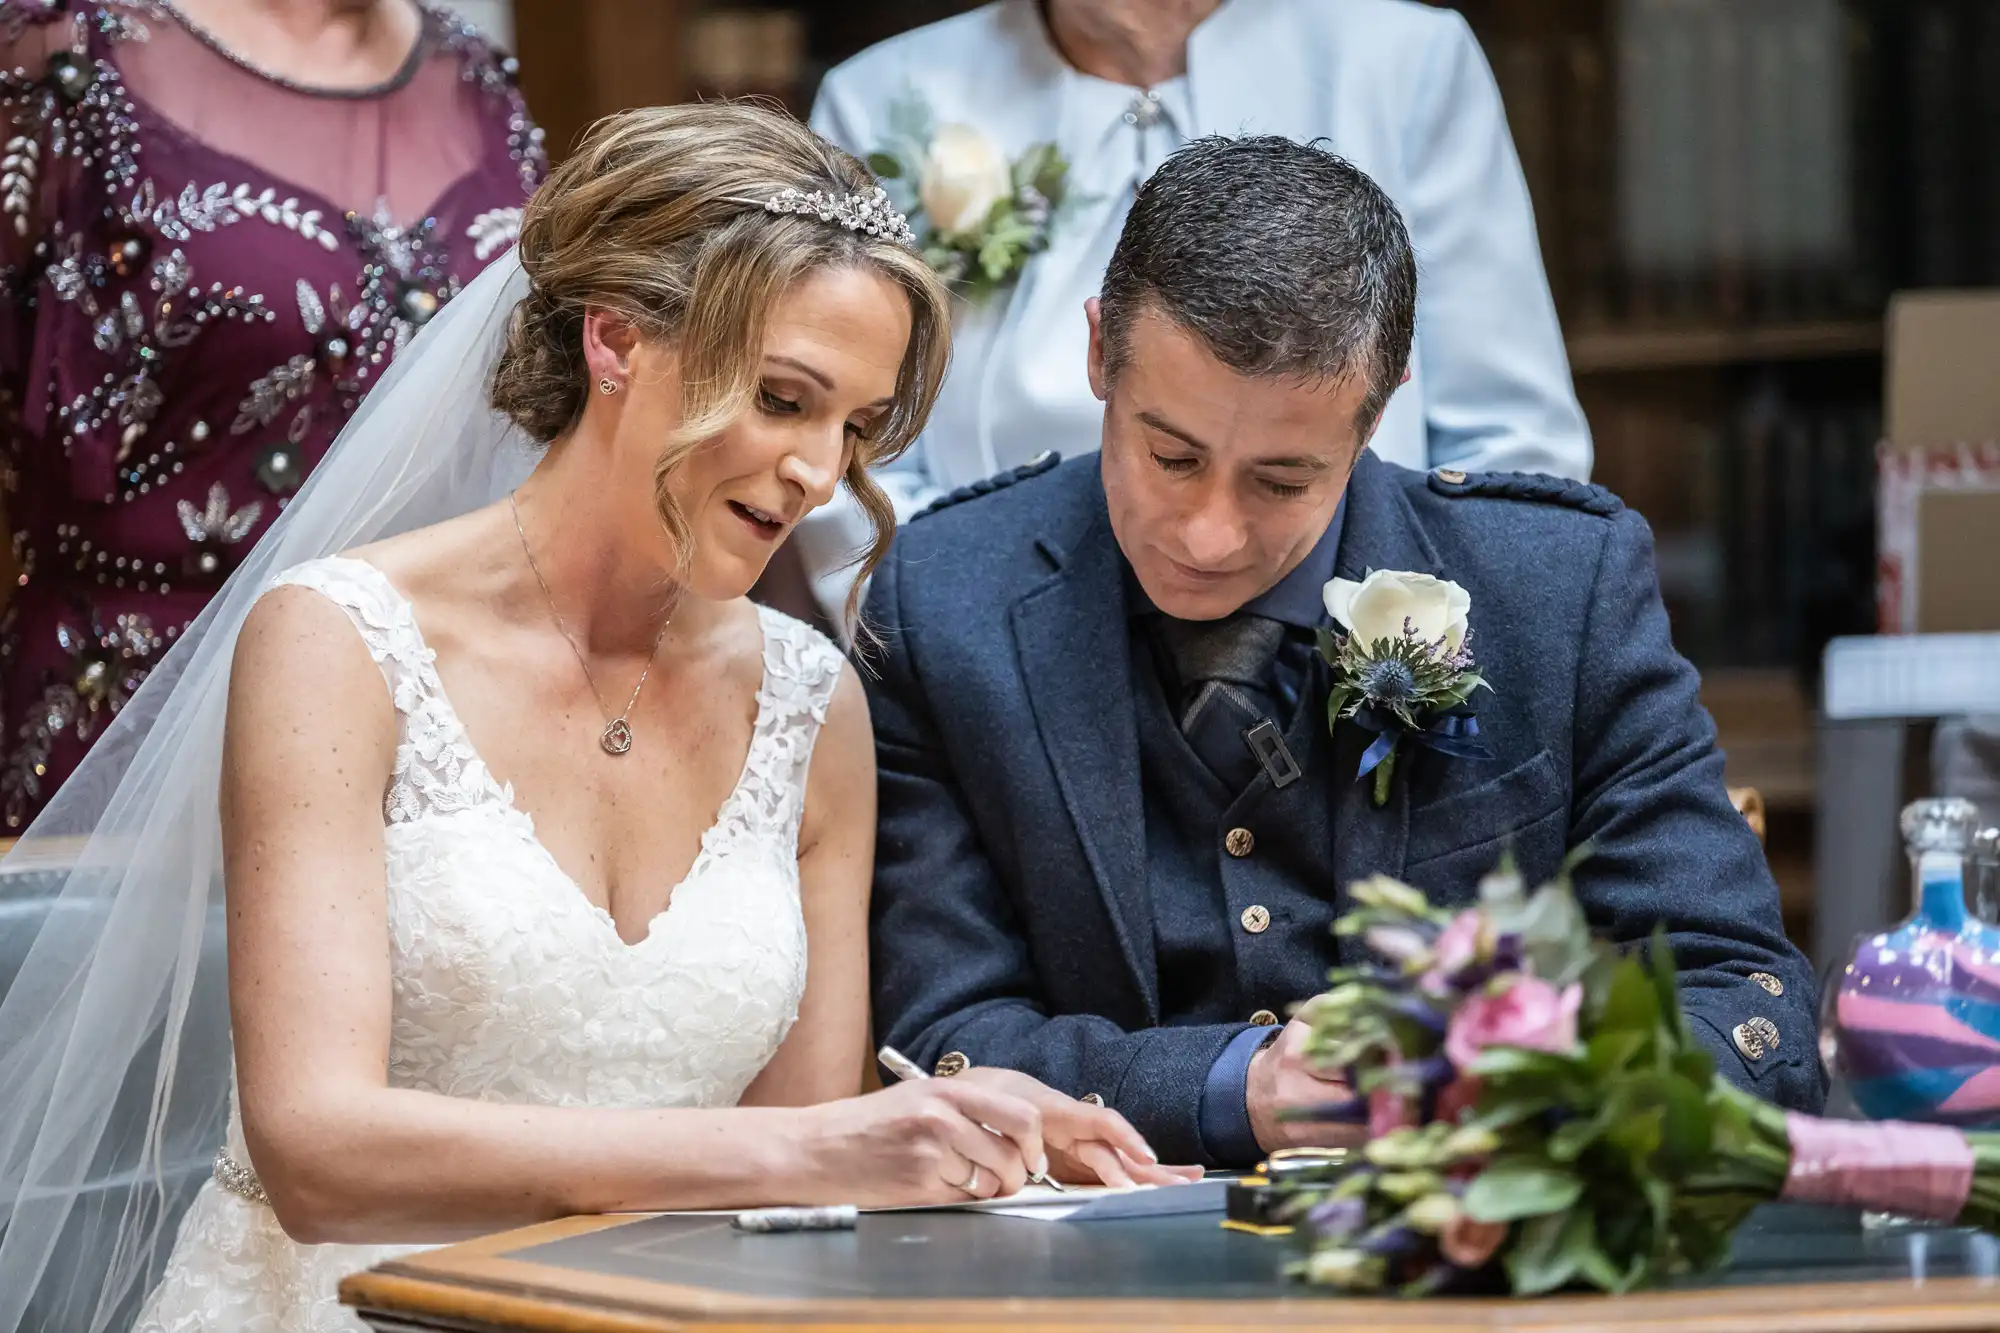 A bride in a white dress and a groom in a dark suit sign documents at a table with a bouquet of flowers.